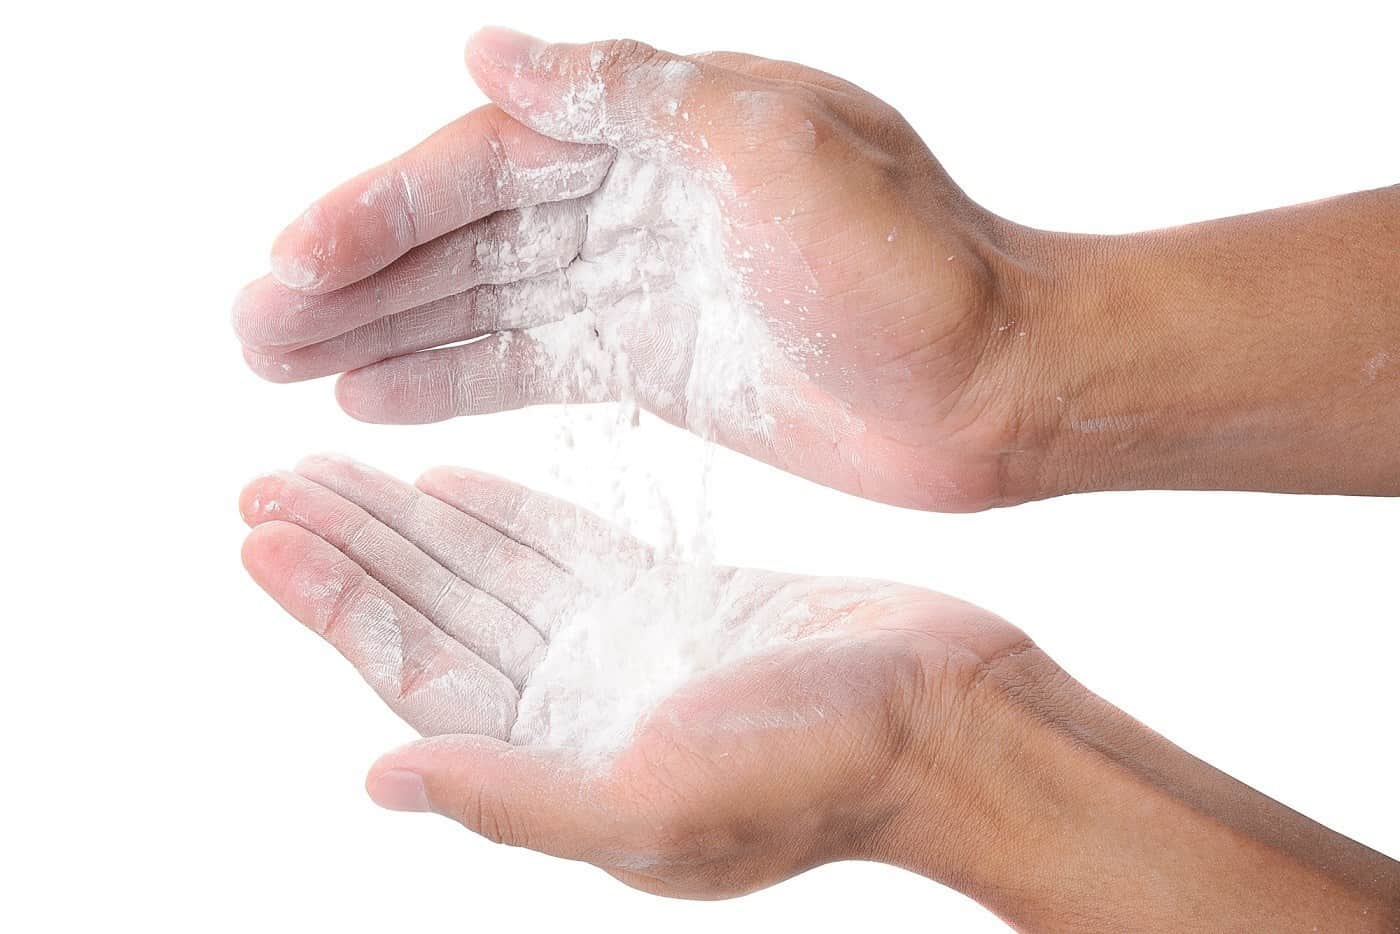 A person with baby powder on his hands.